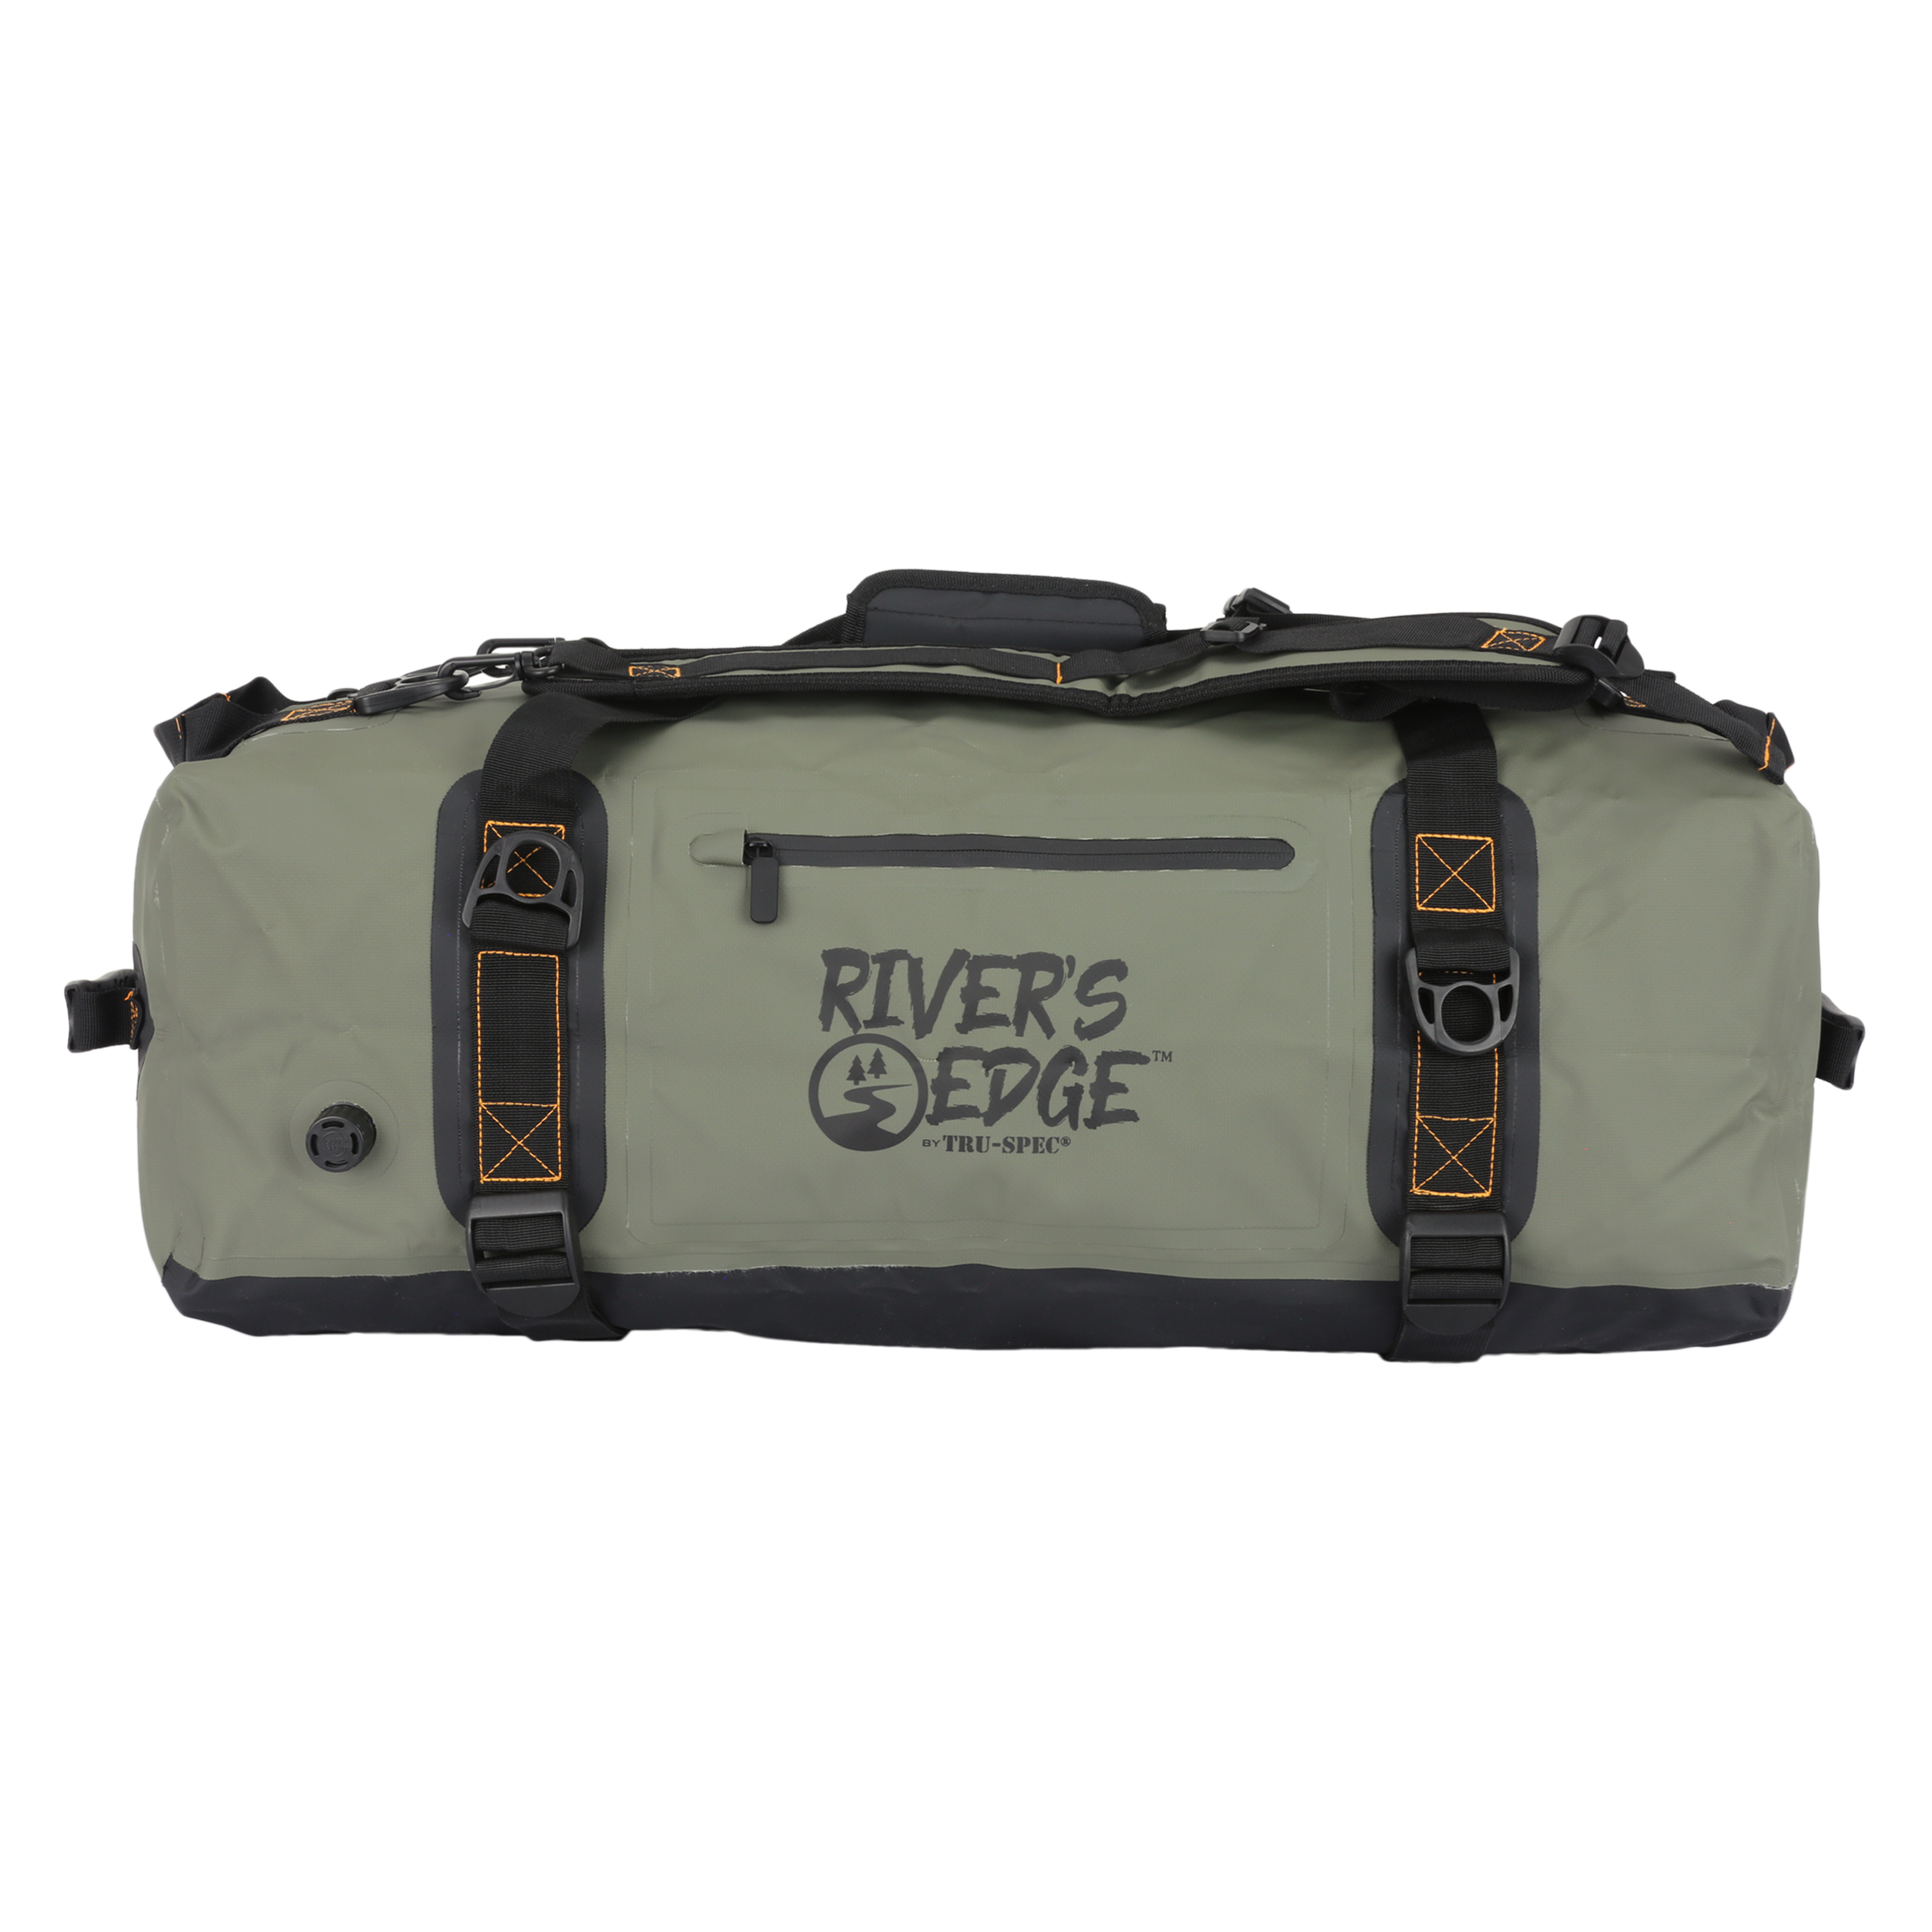 RIVER’S EDGE™ 60L WATERPROOF DRY XPEDITION DUFFLE BAG